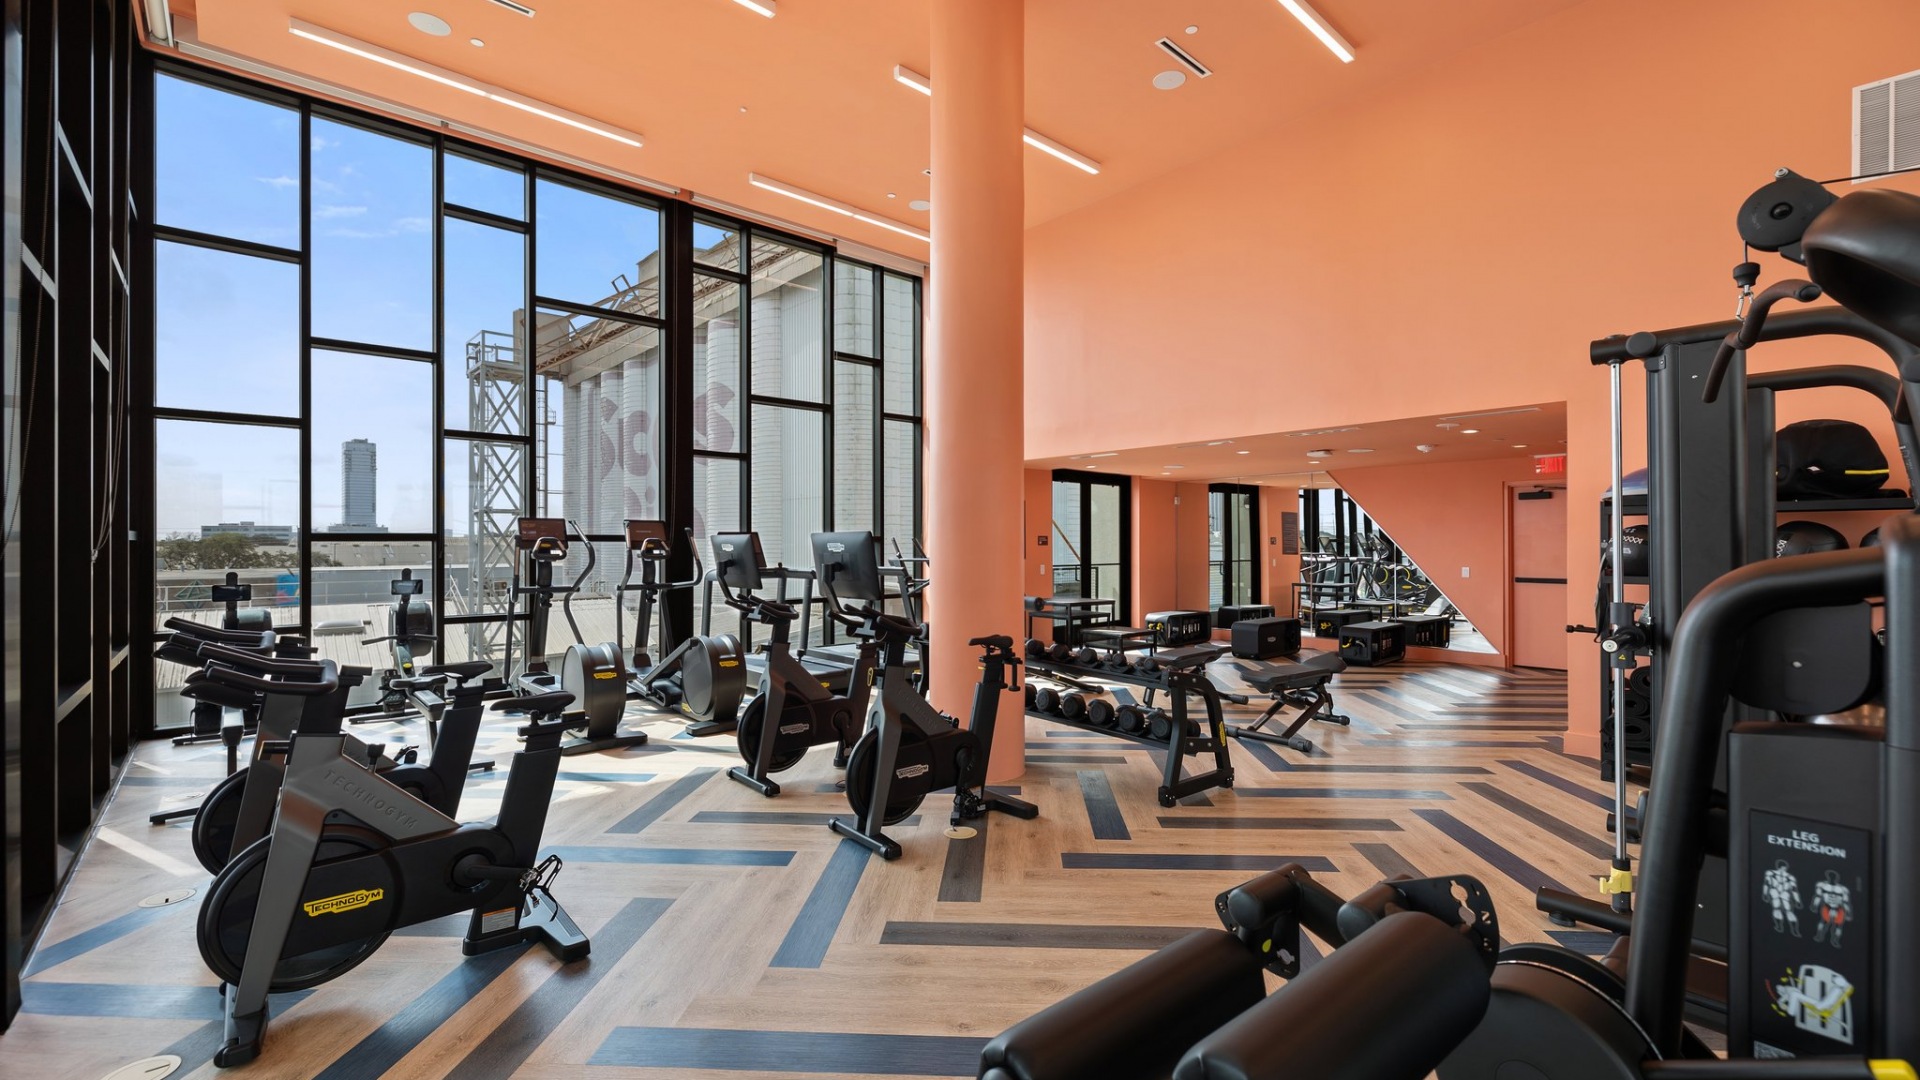 Large fitness center with wood floors and plenty of equipment